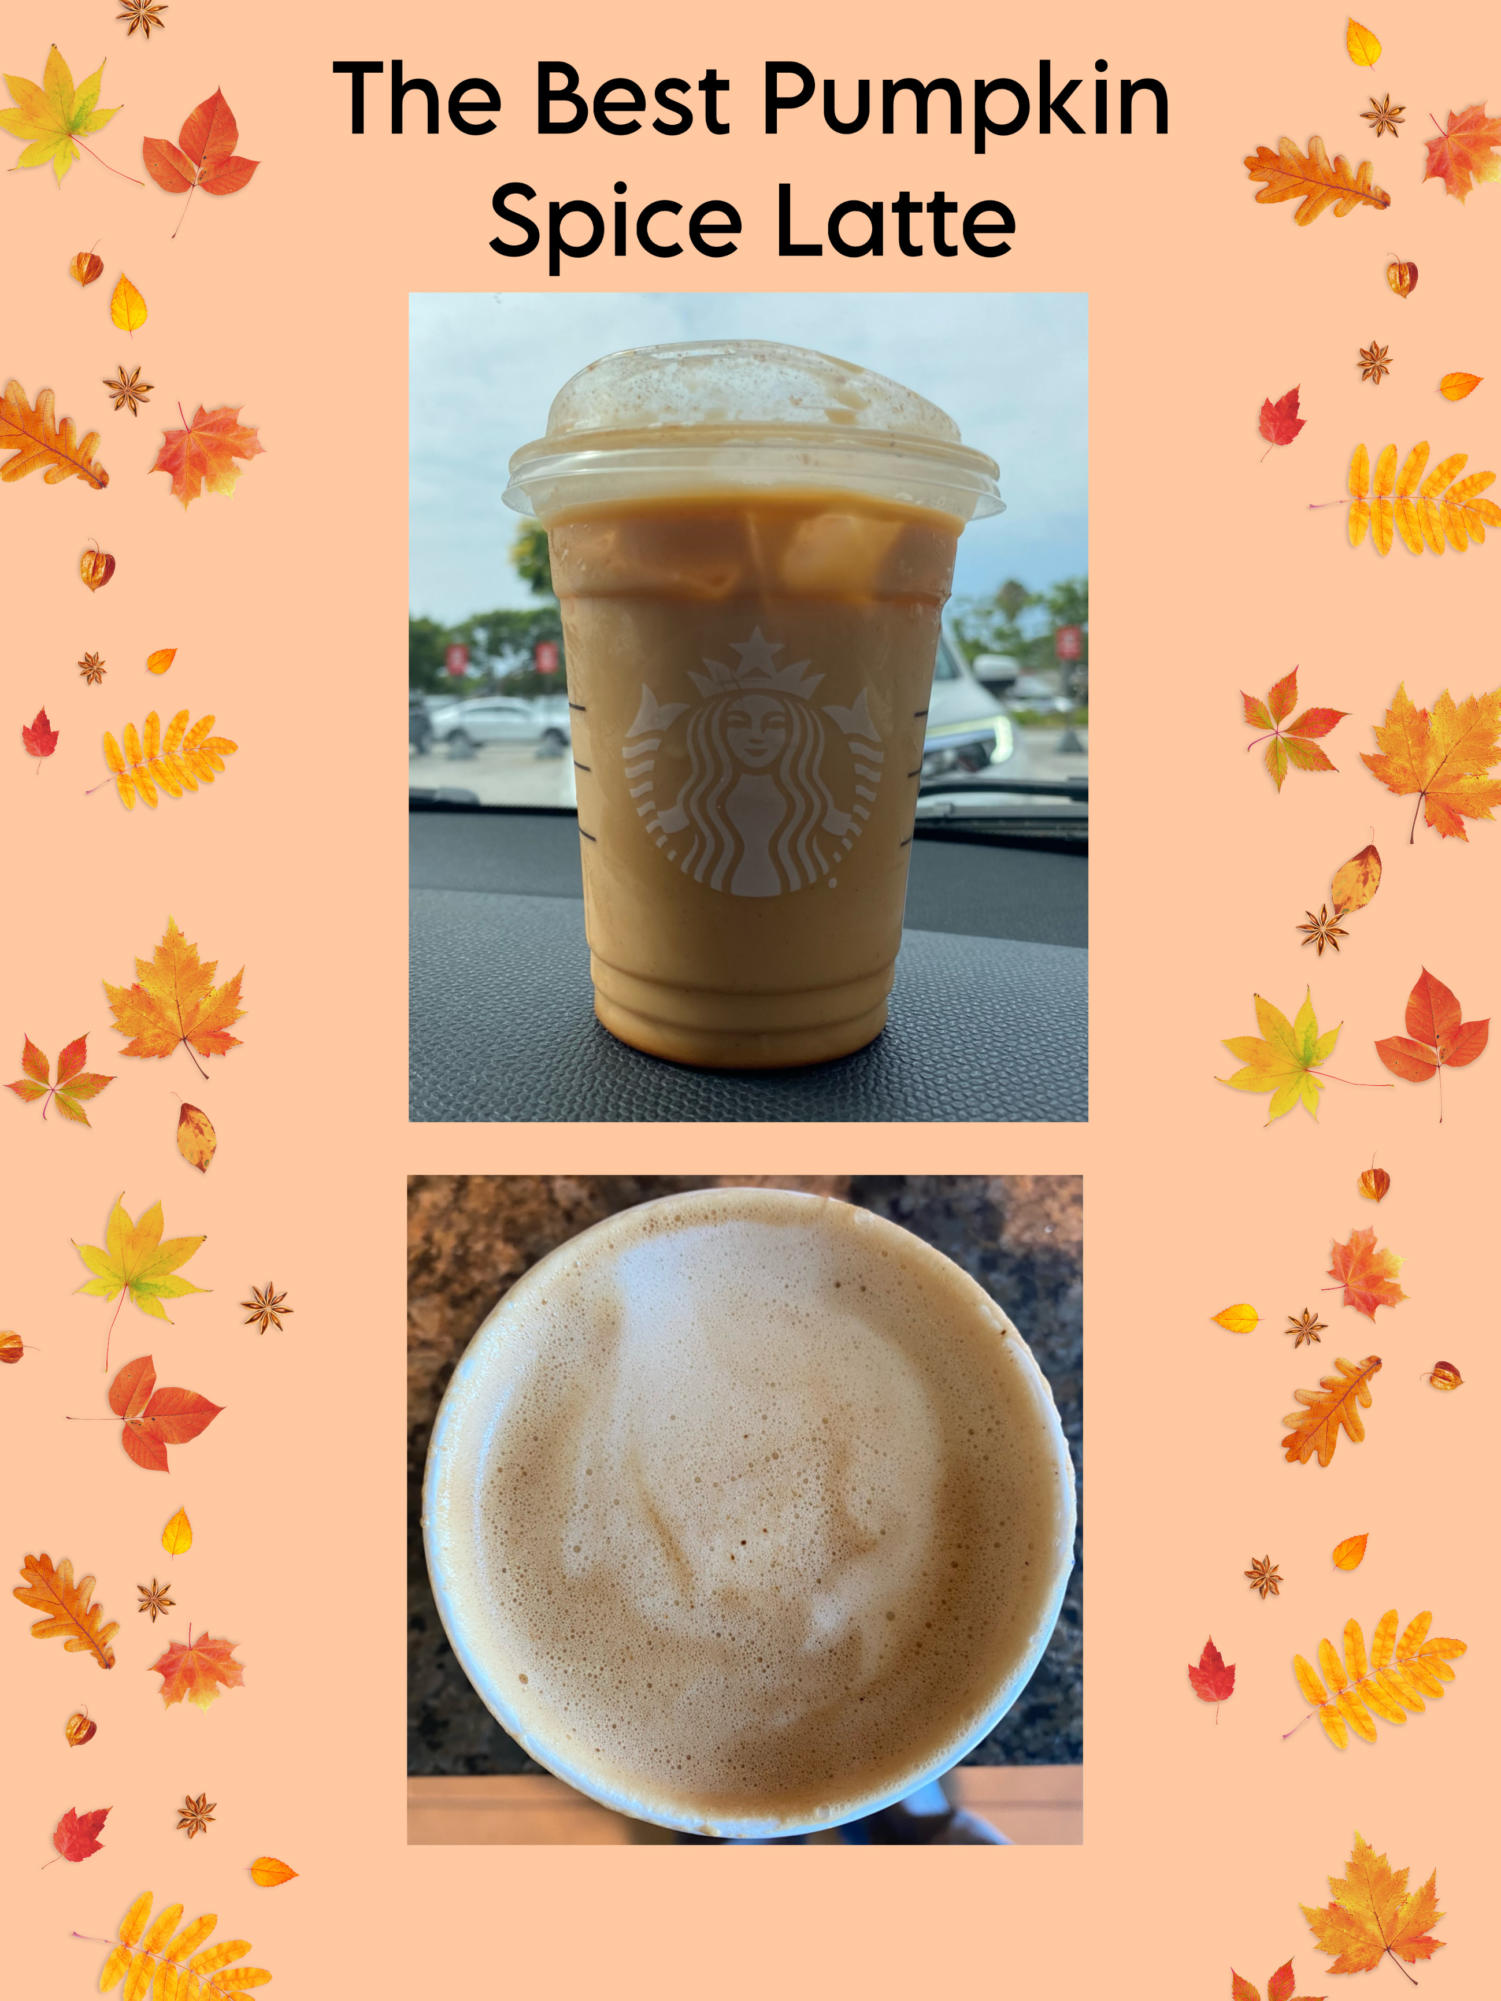 Who Makes the Best Pumpkin Spice Latte?